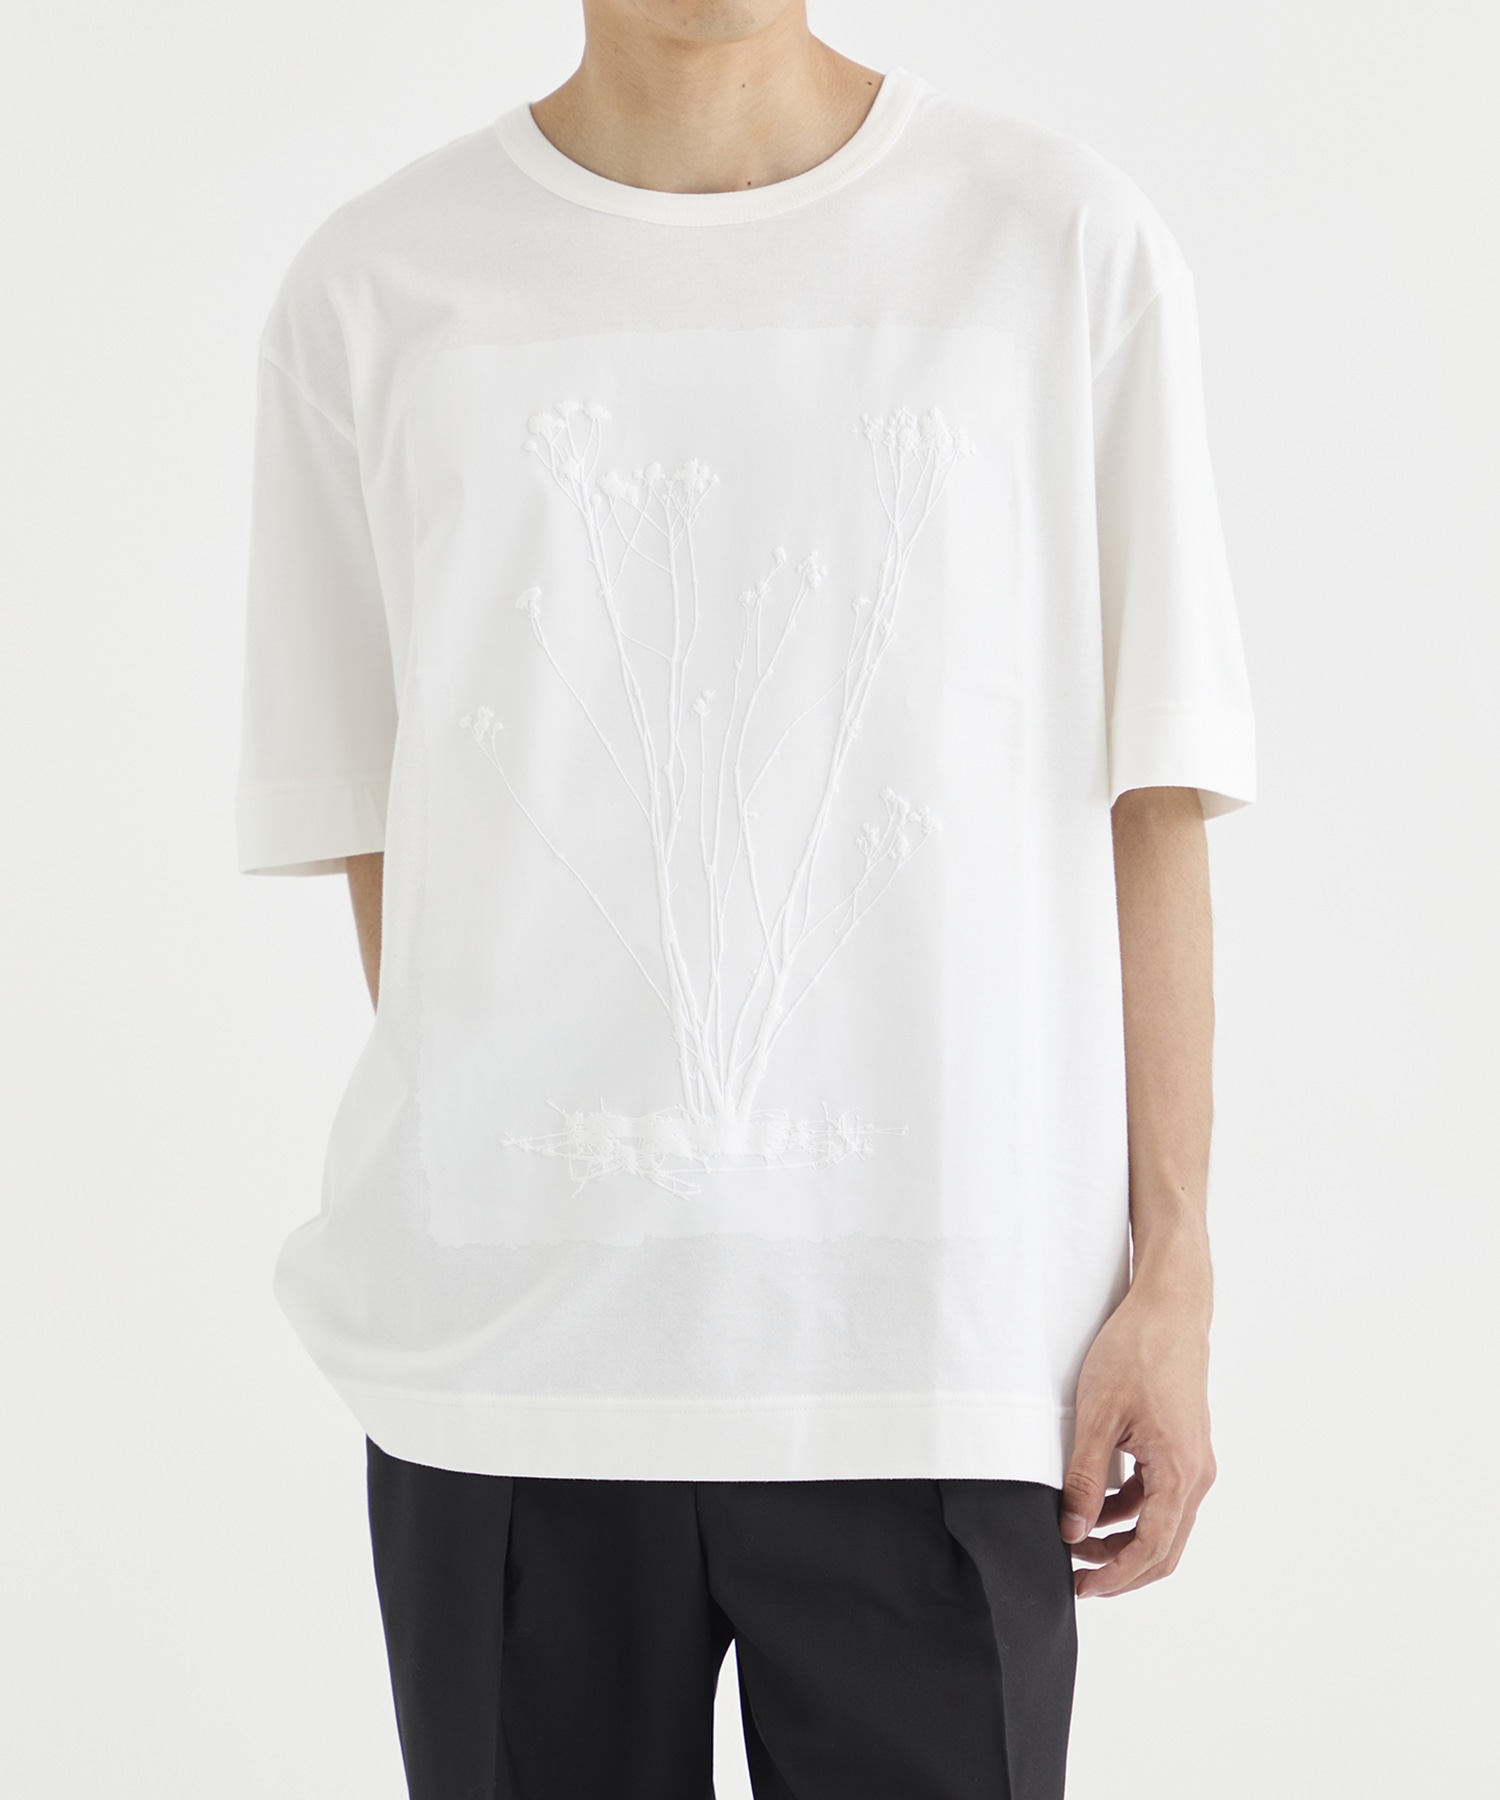 PRESSED FLOWER S/S T-SHIRTS